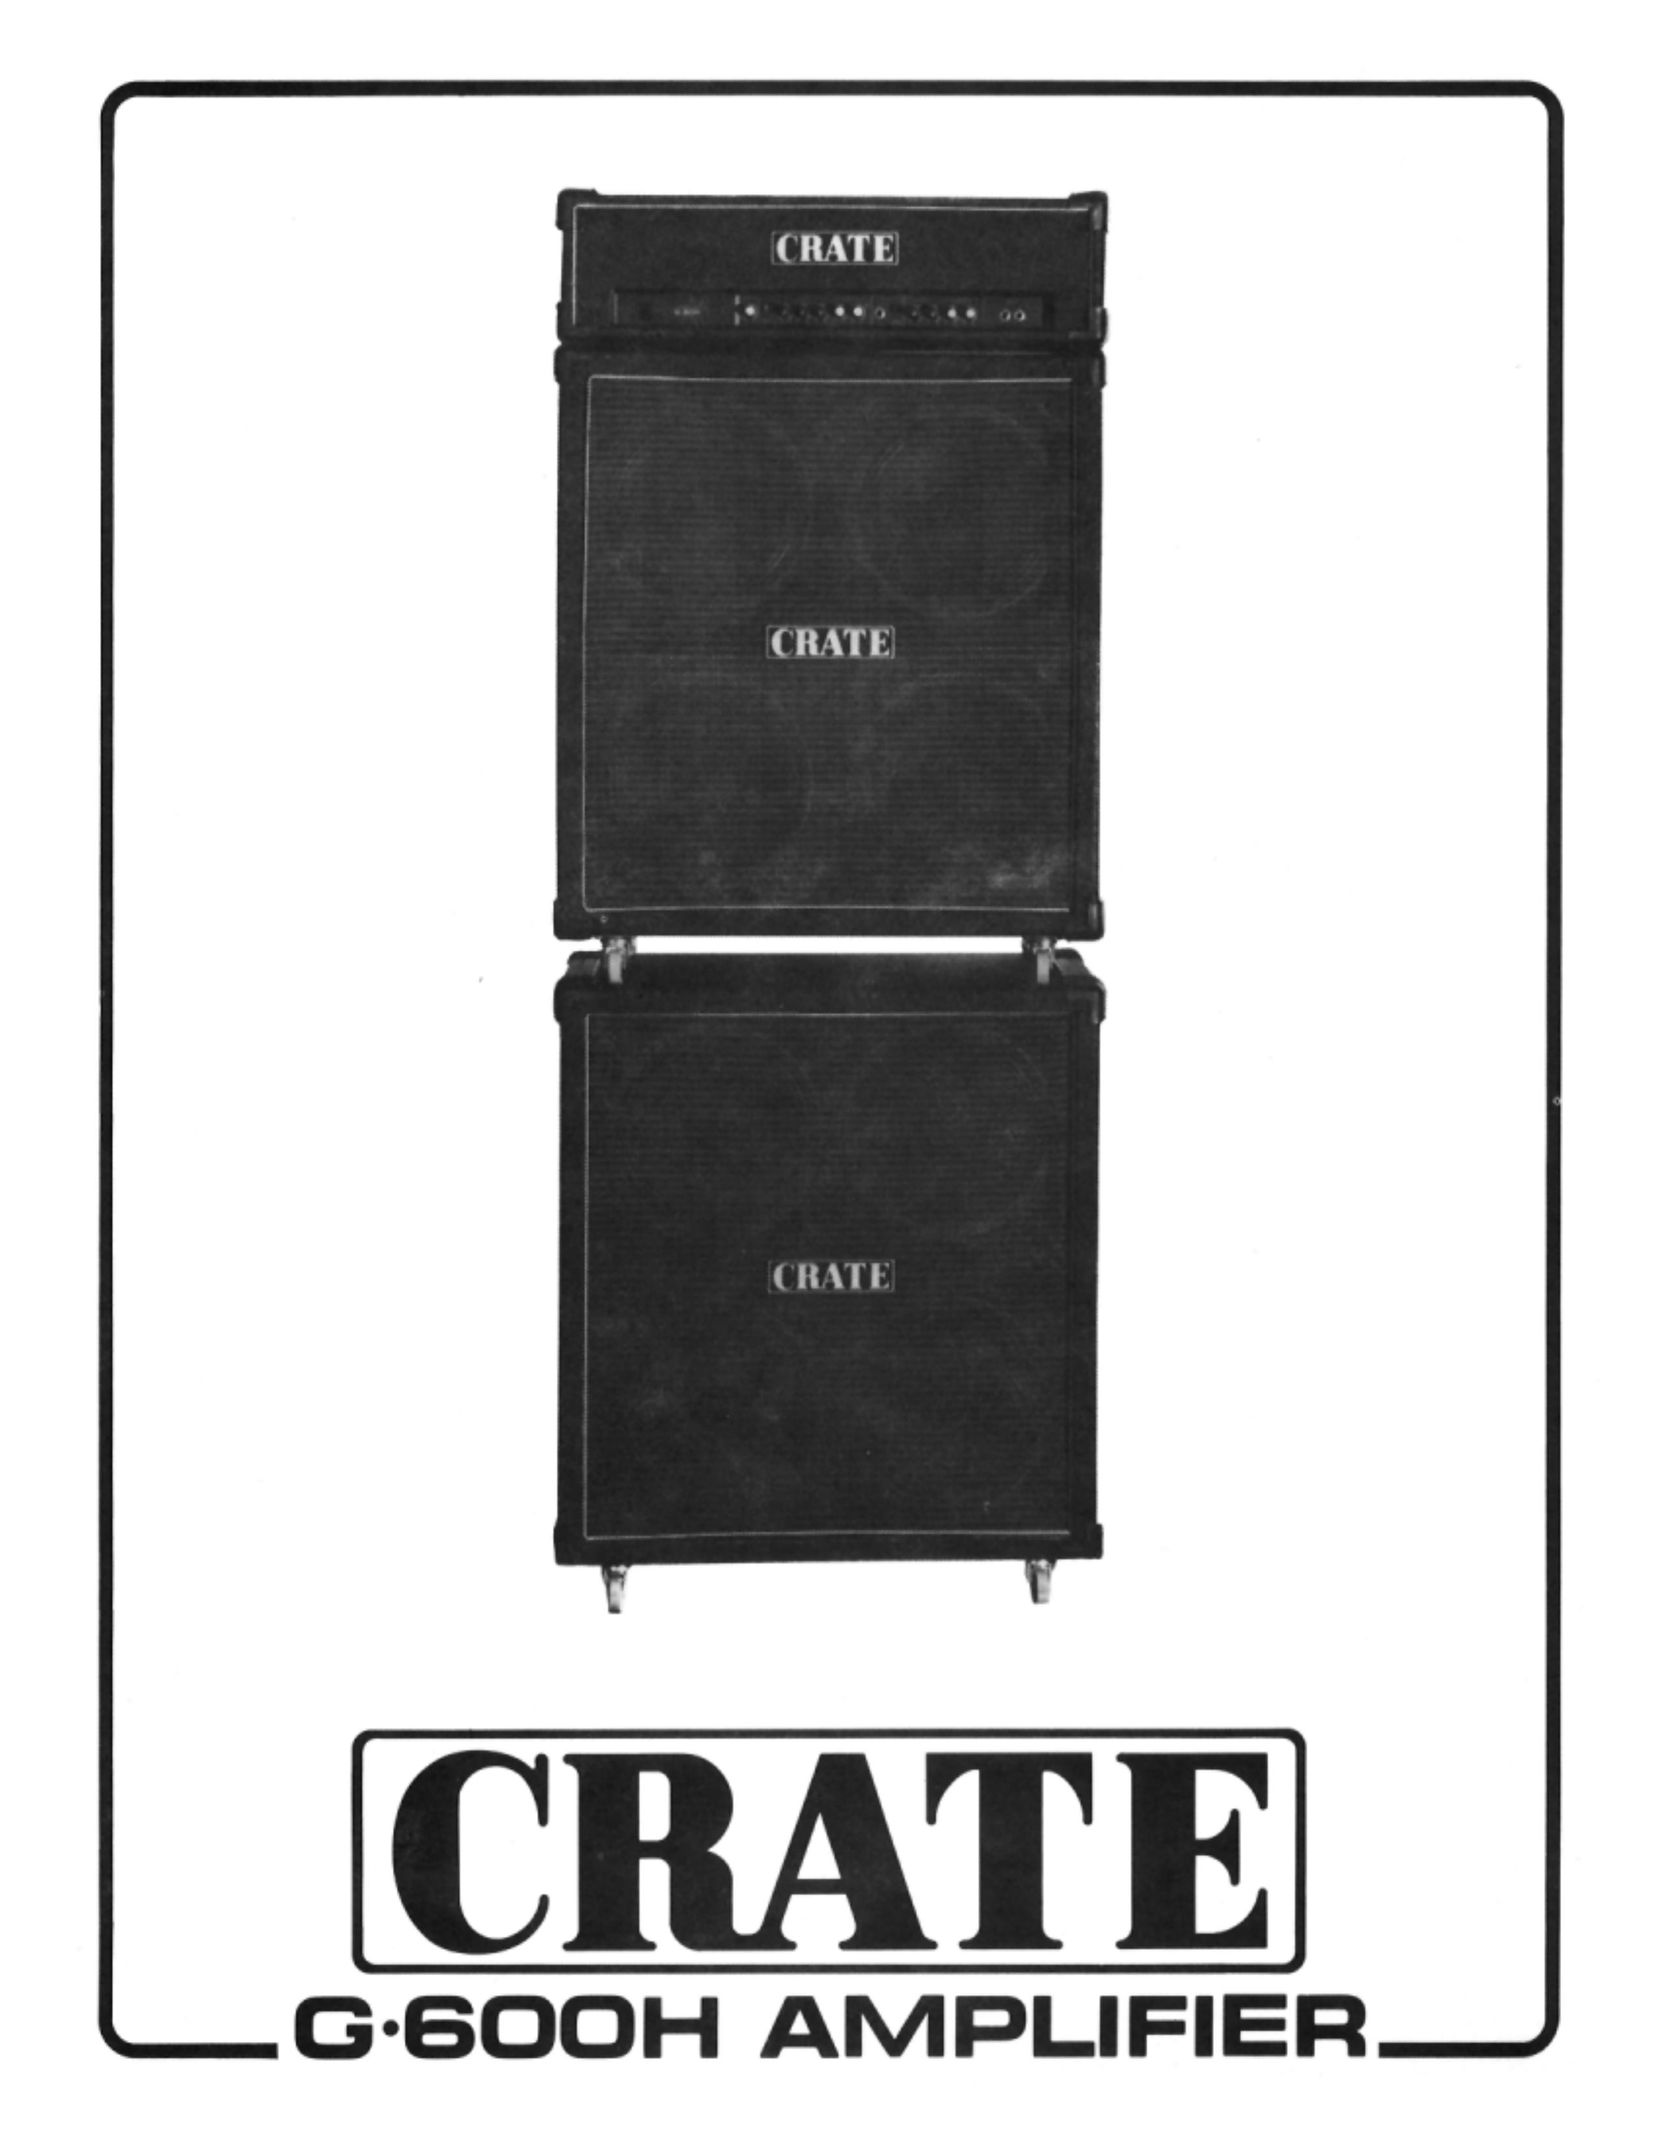 Crate Amplifiers G-600H Stereo Amplifier User Manual